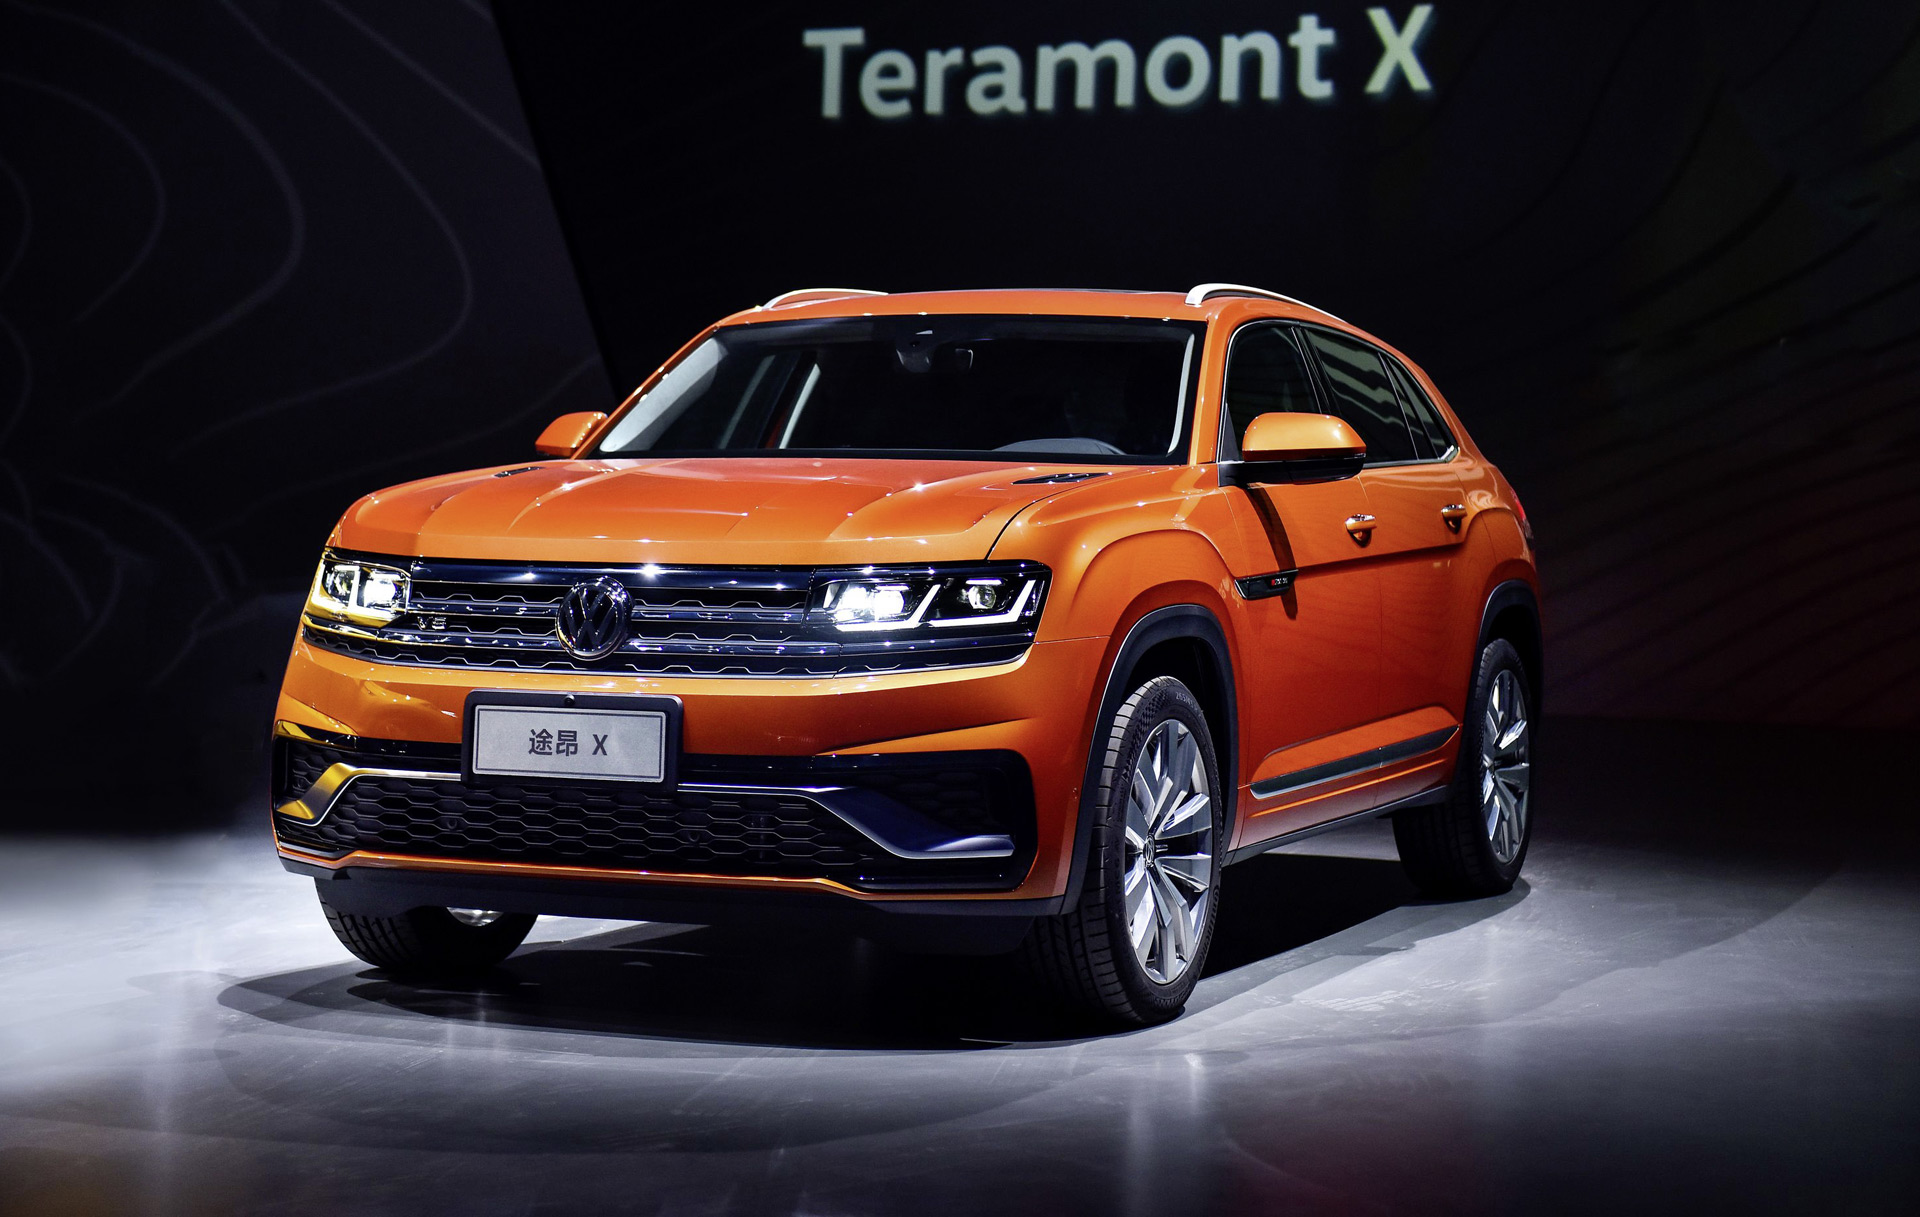 VW's 2-row Atlas SUV shown in China as Teramont X